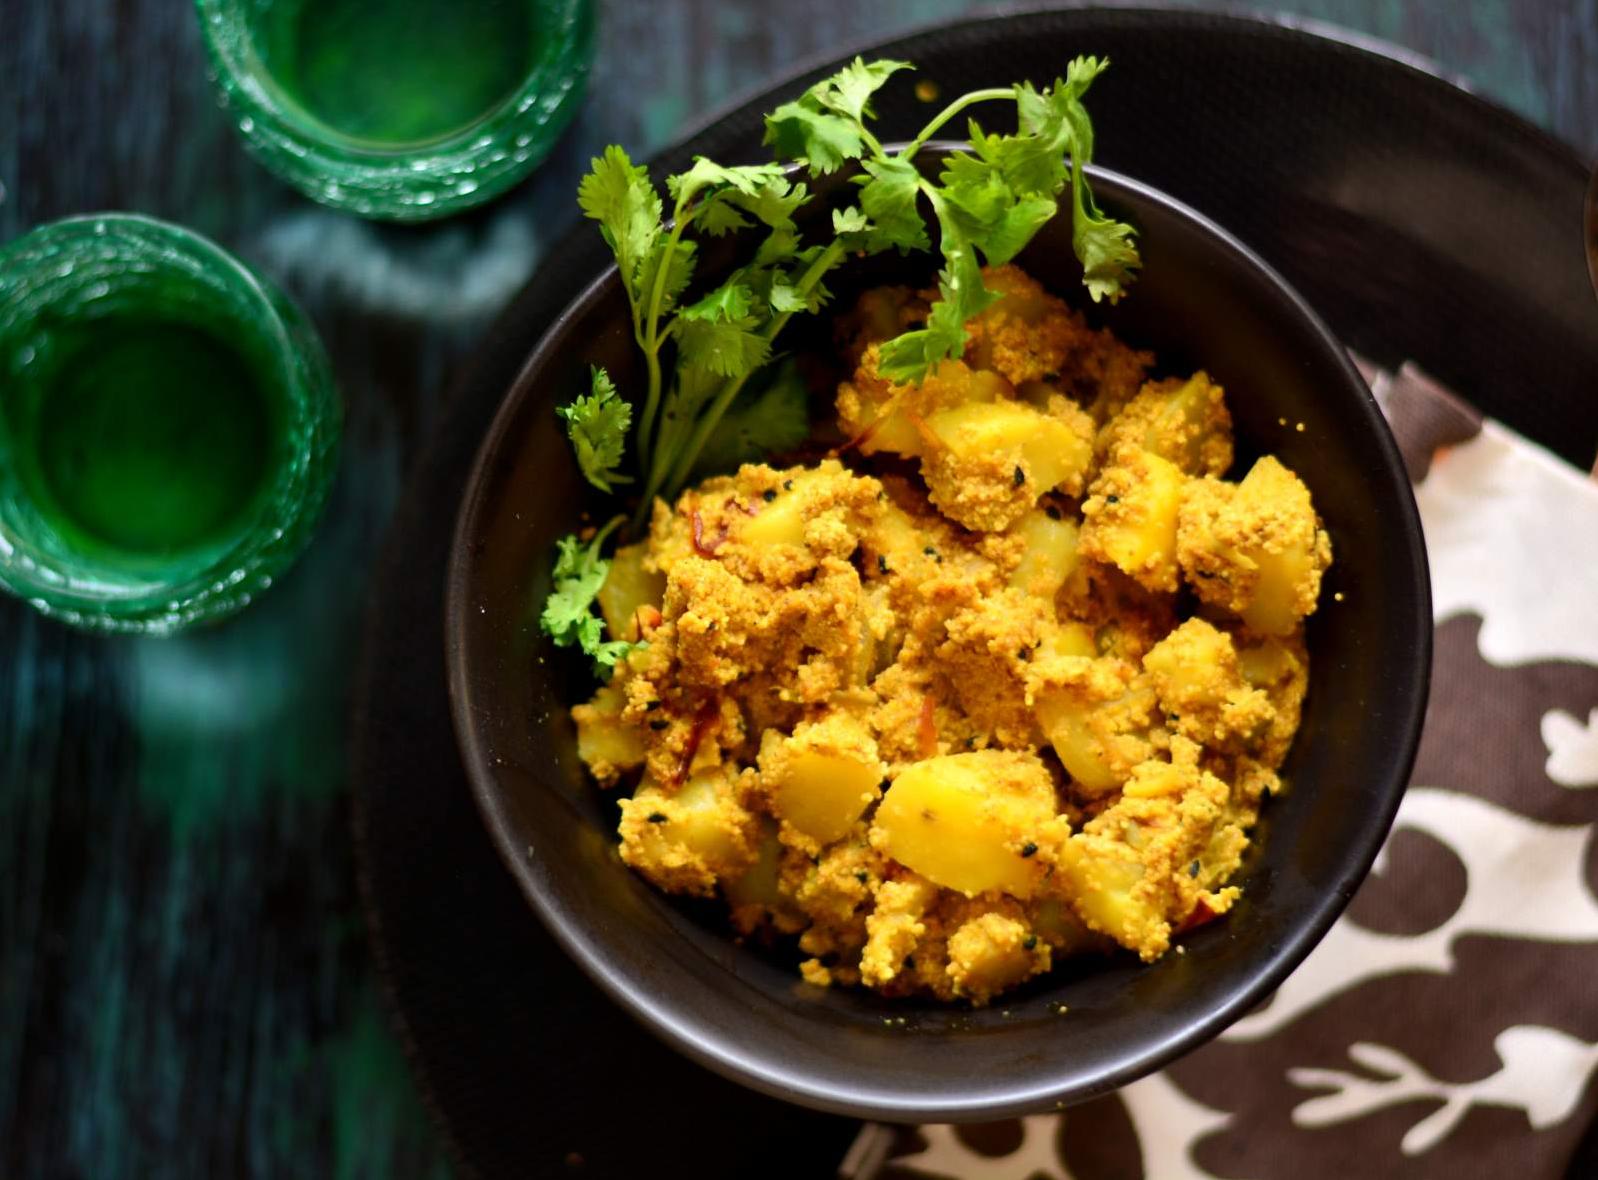  For a taste of India in every bite, try this flavorful Aloo Posto recipe!